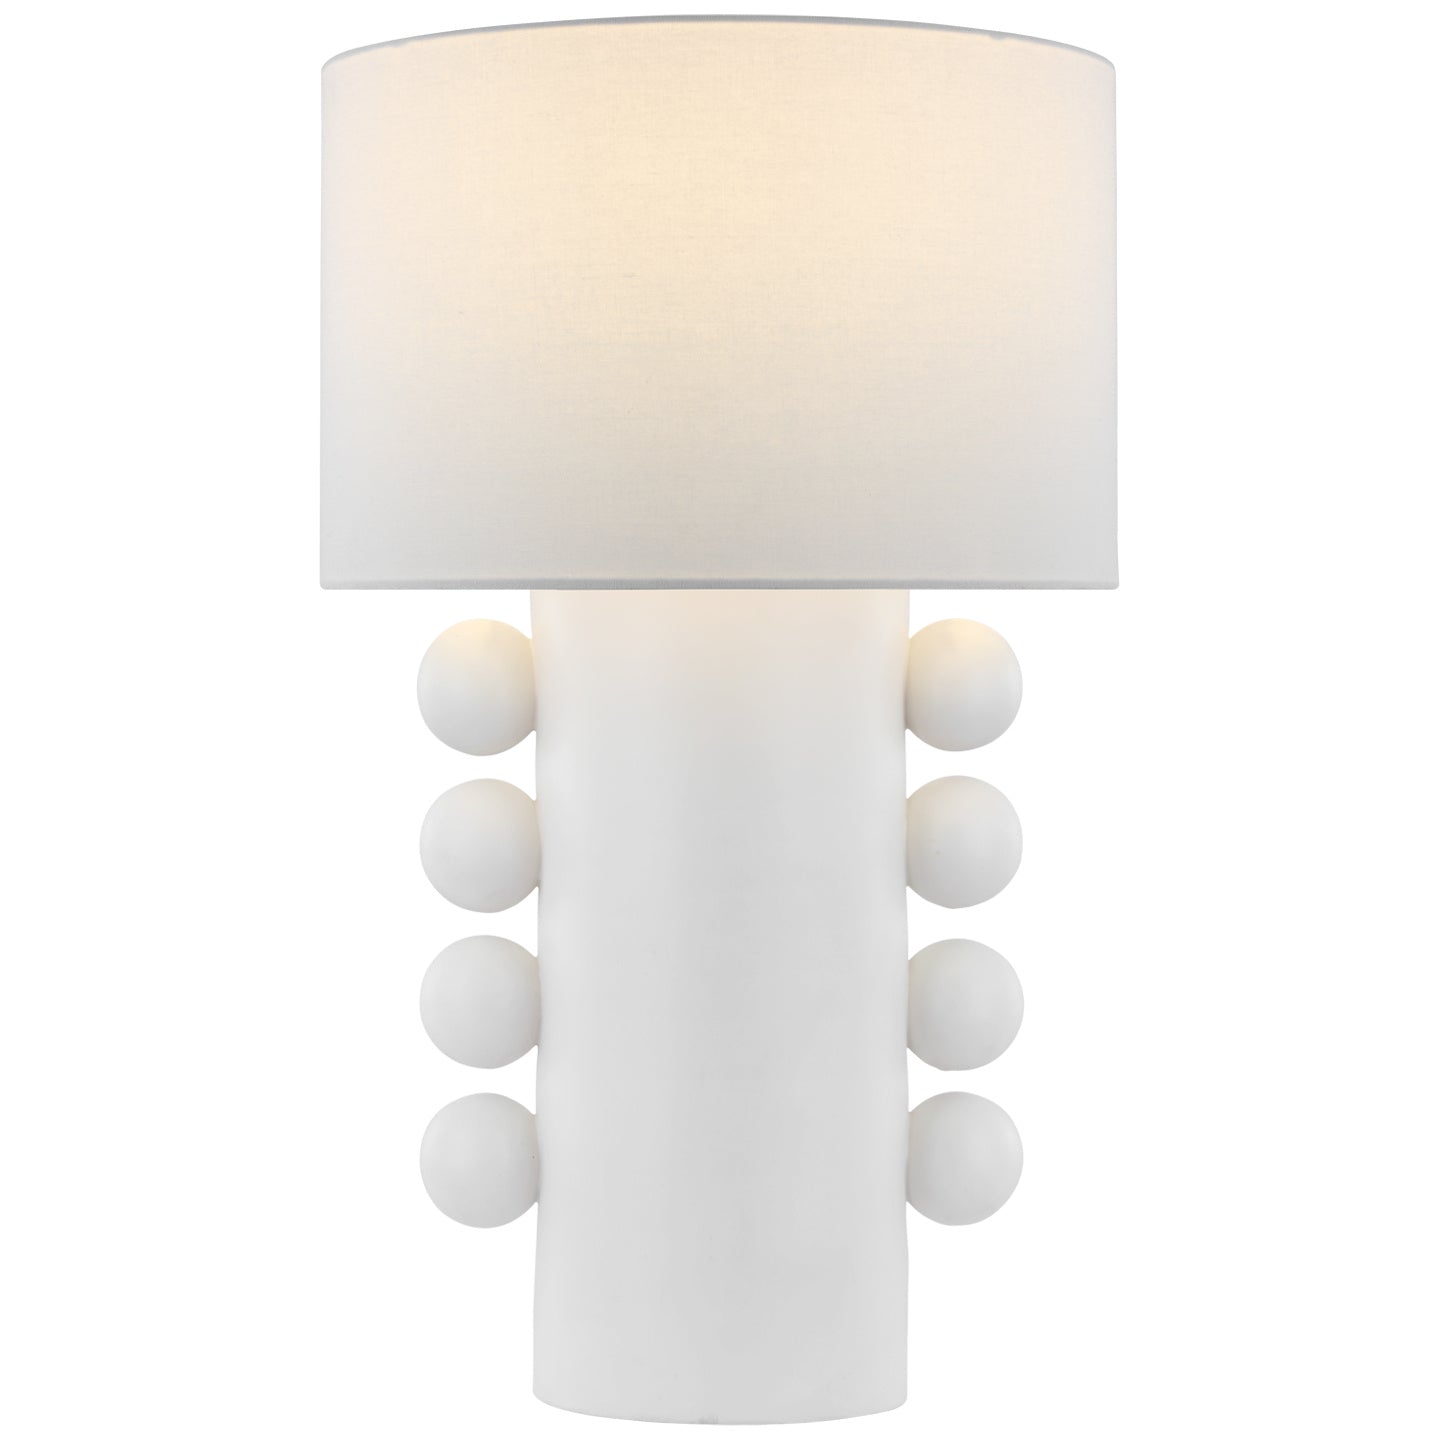 Load image into Gallery viewer, Visual Comfort Signature - KW 3687PW-L - LED Table Lamp - Tiglia - Plaster White
